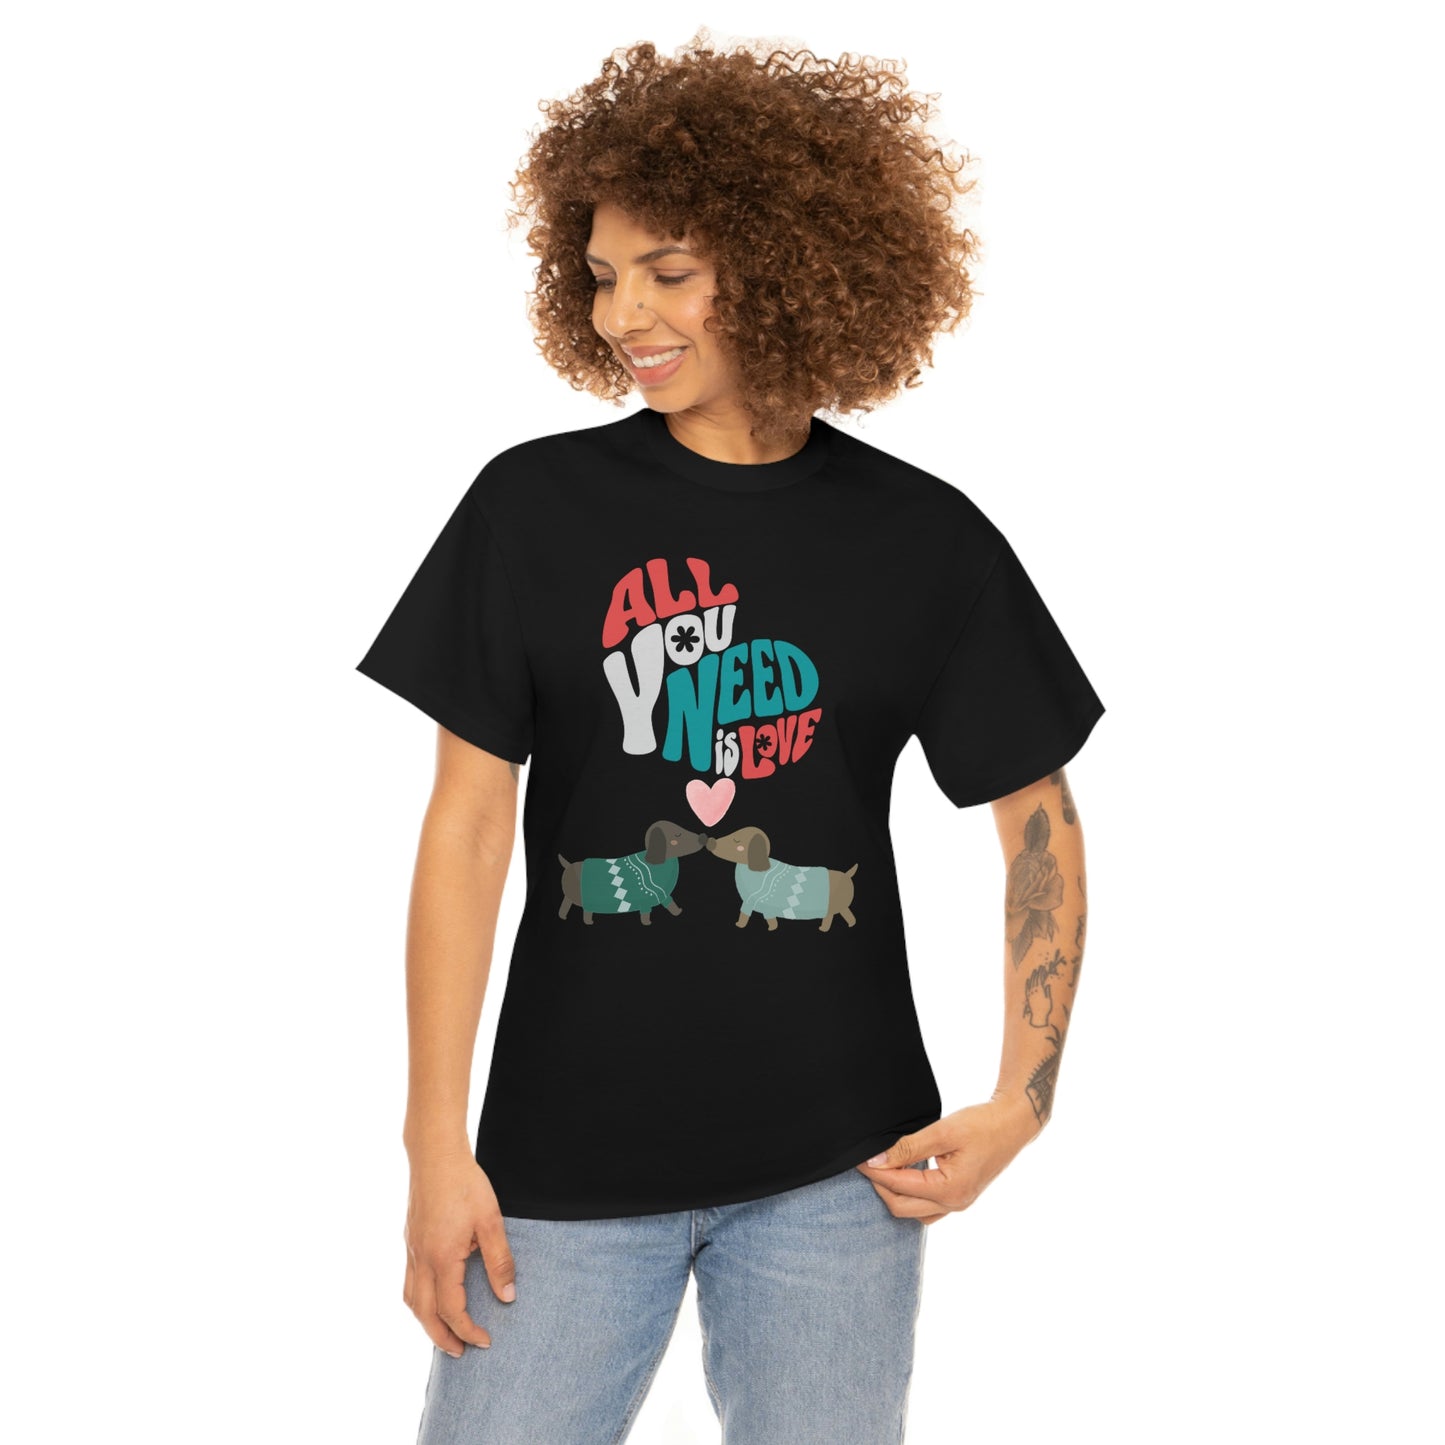 All you need is LOVE two Dogs design Graphic tee shirt